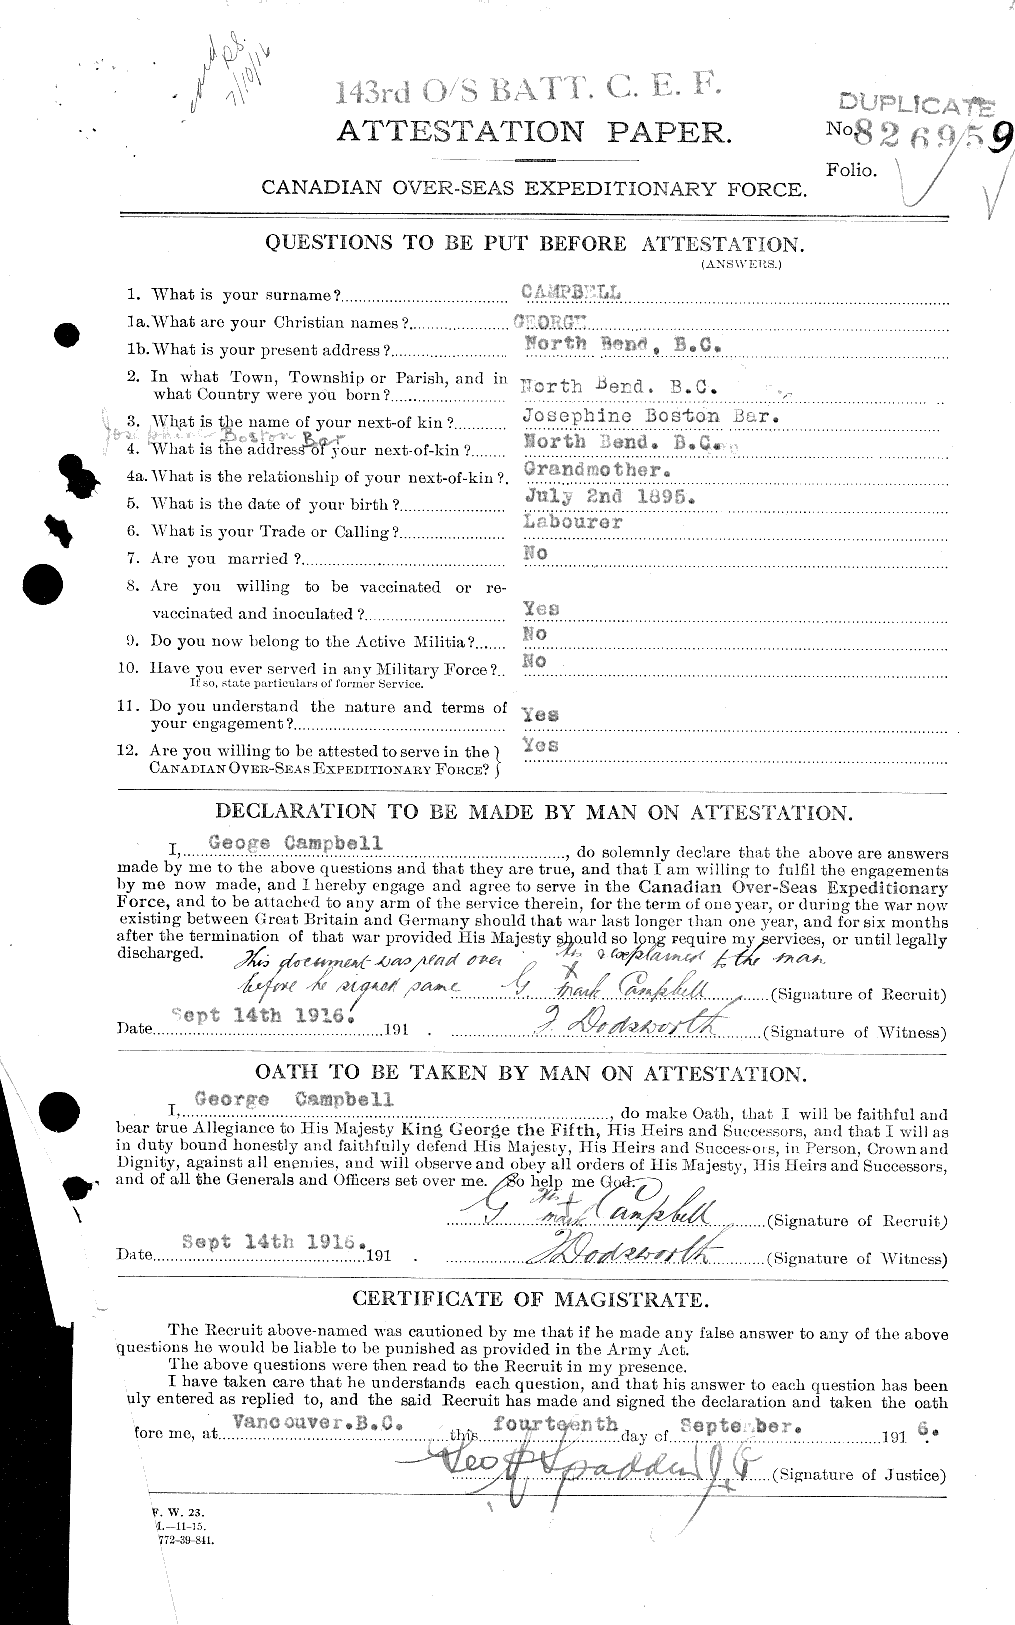 Personnel Records of the First World War - CEF 008307a